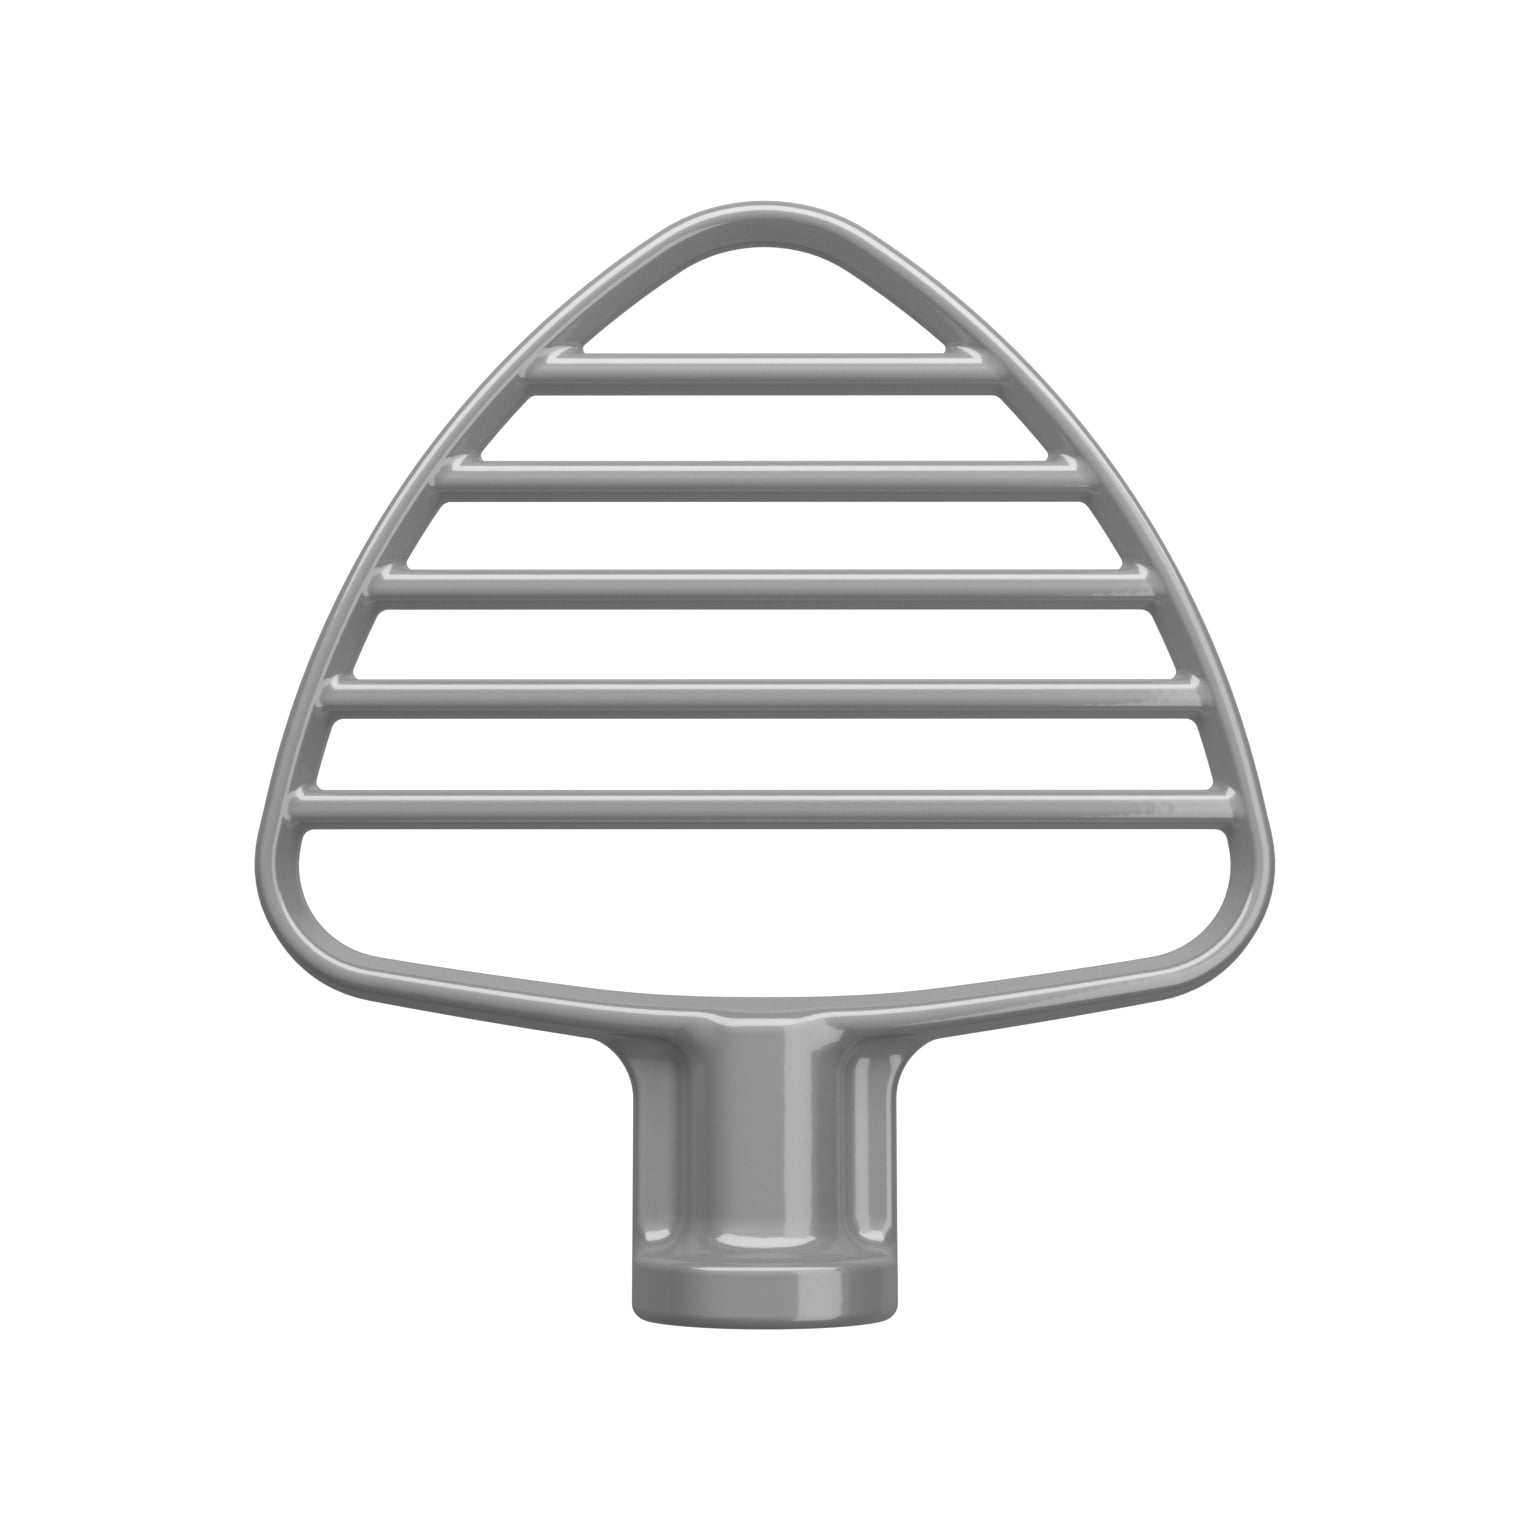 KSMPB5SS by KitchenAid - Stainless Steel Pastry Beater for KitchenAid® Tilt  Head Stand Mixers